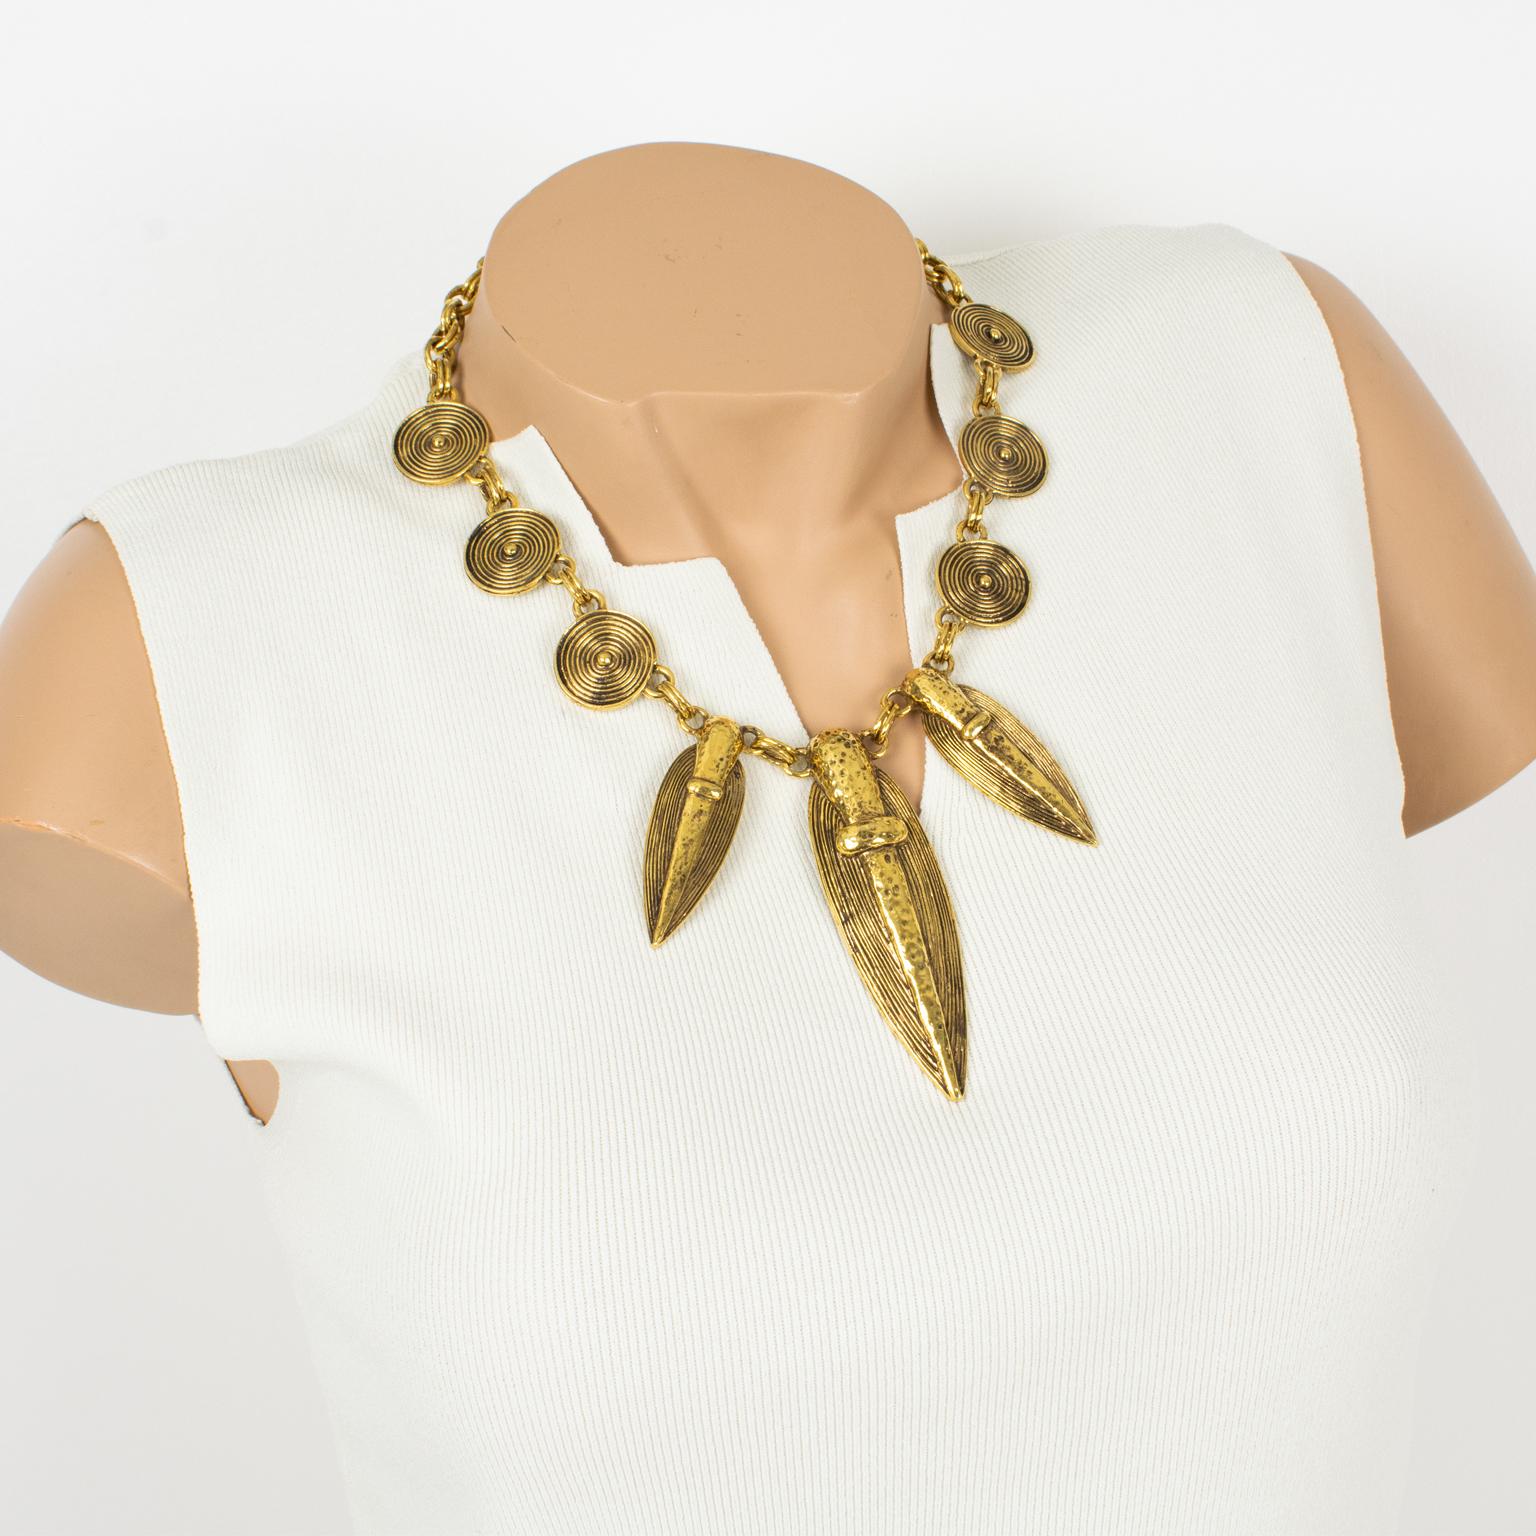 Guy Laroche Paris designed this refined tribal choker necklace in the 1990s. The dangling design features South American-inspired charms design, possibly Pre-Colombian with carved and textured gilt metal. The heavy gilded metal double-strand chain